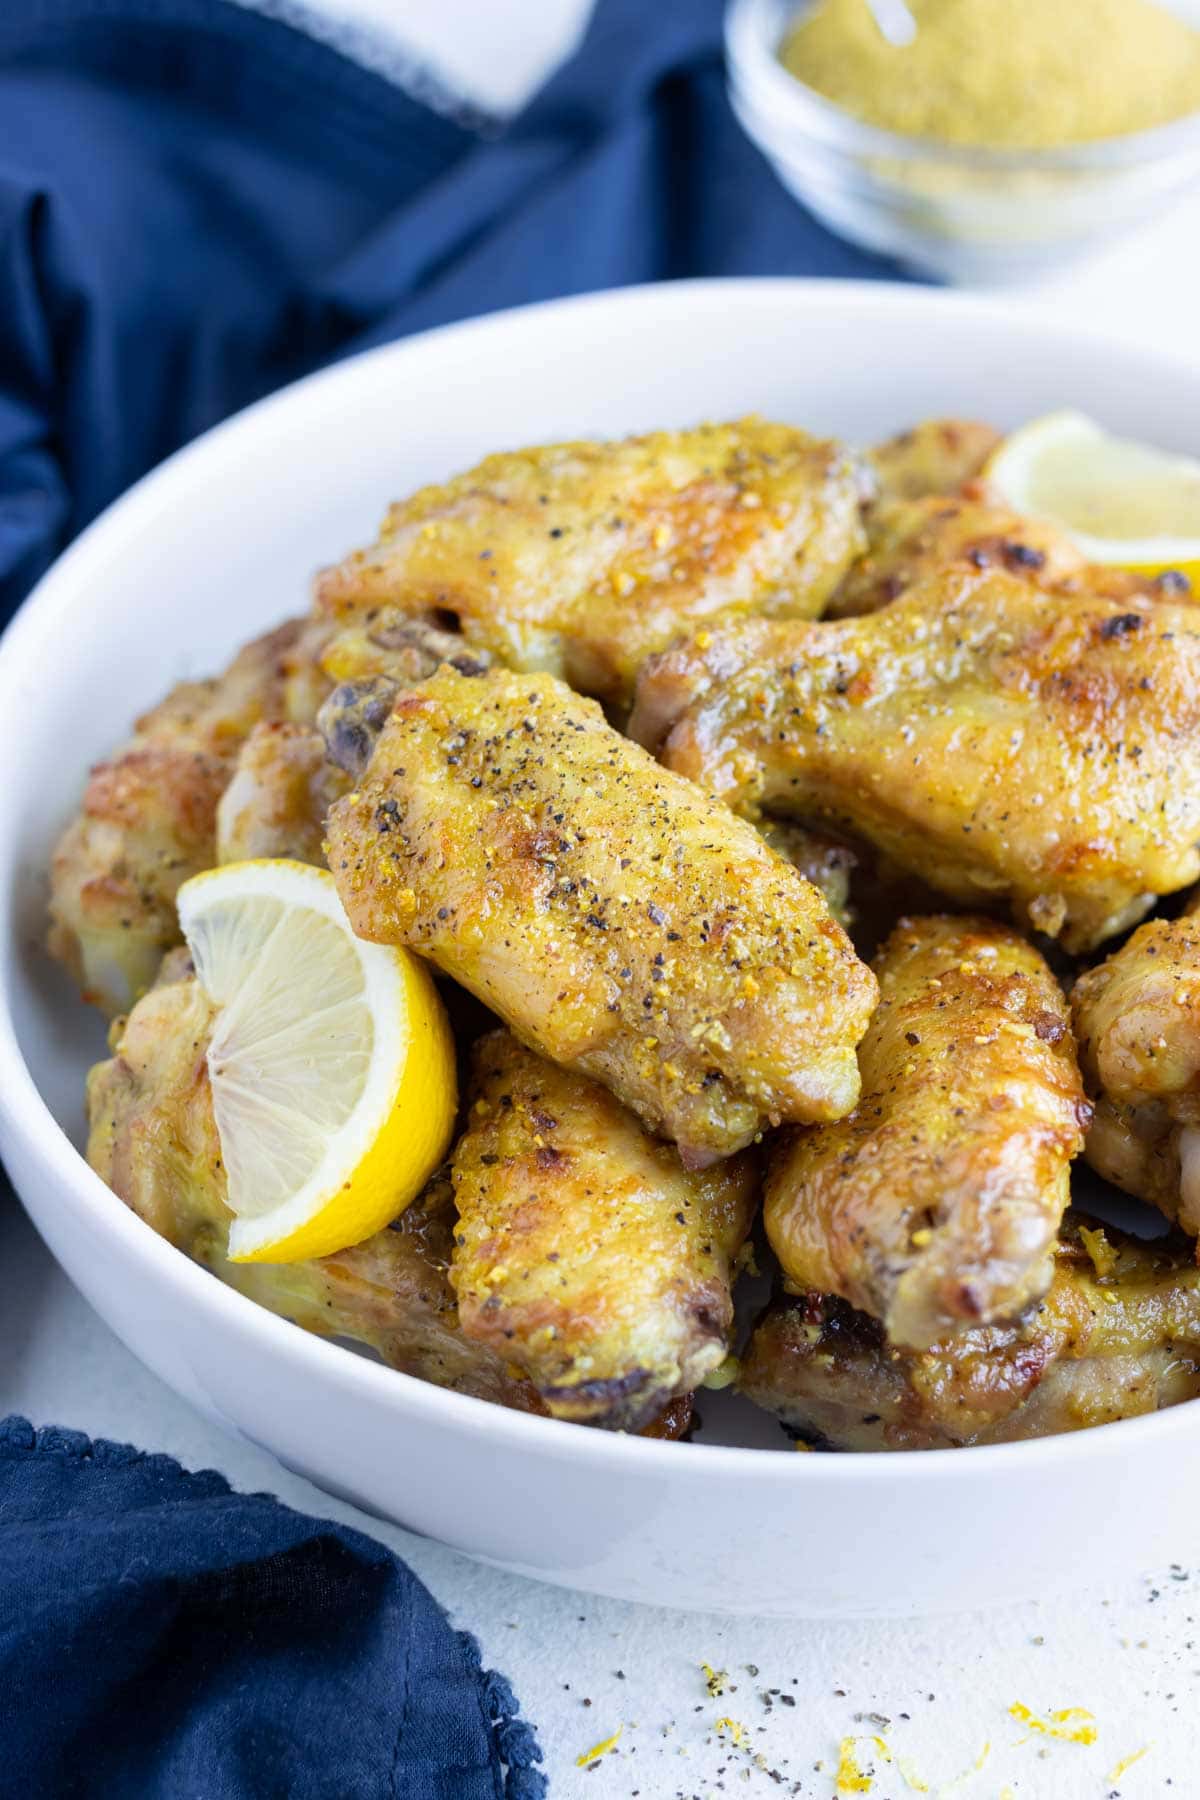 Oven-baked lemon pepper wings are served as a low-carb appetizer in a bowl.